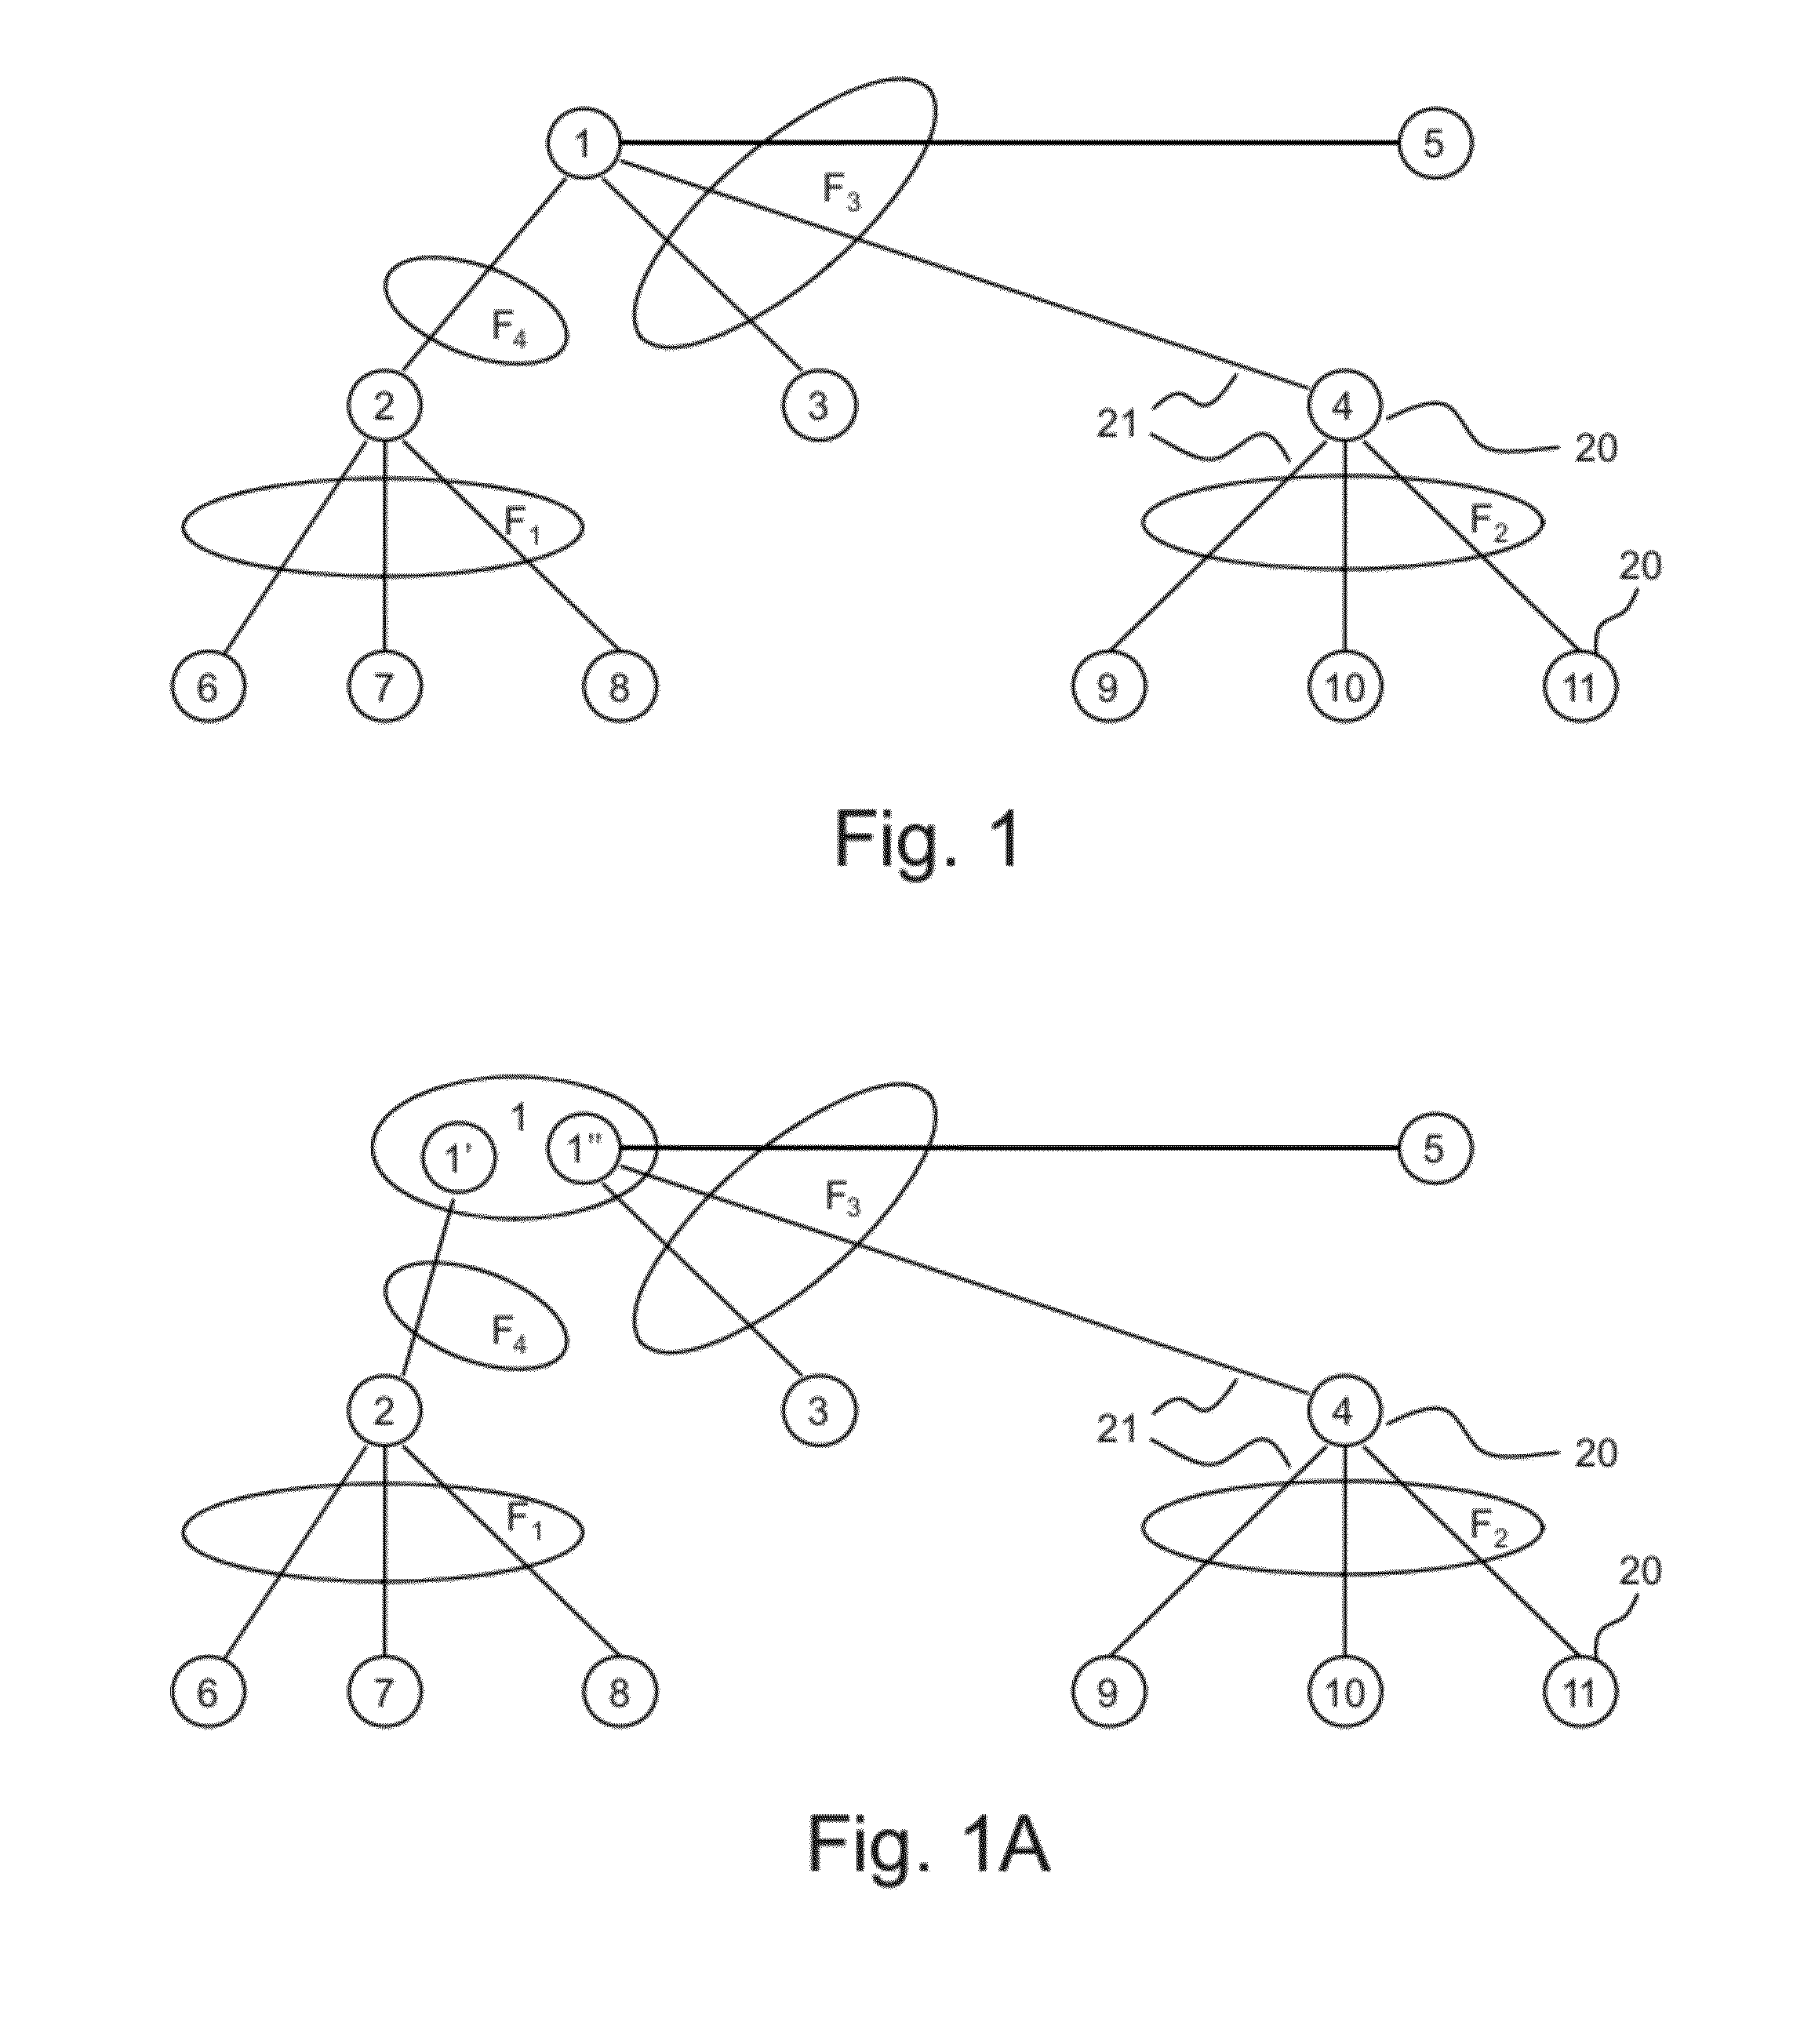 Management of Radio Frequencies in a Wireless or Hybrid Mesh Network